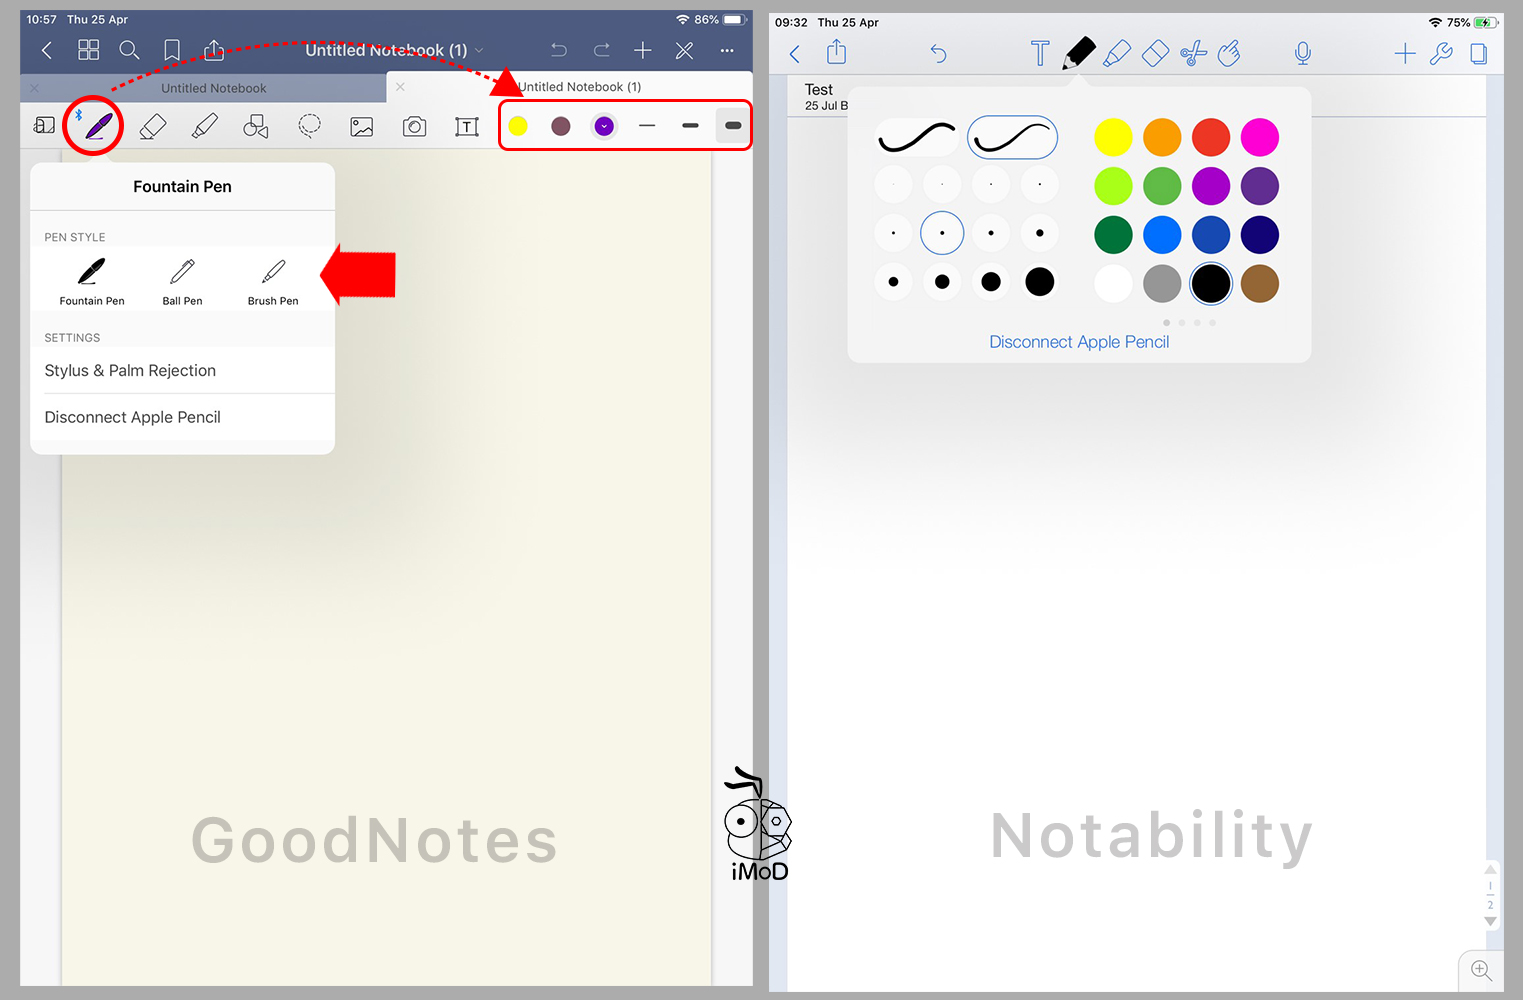 notability or goodnotes reddit